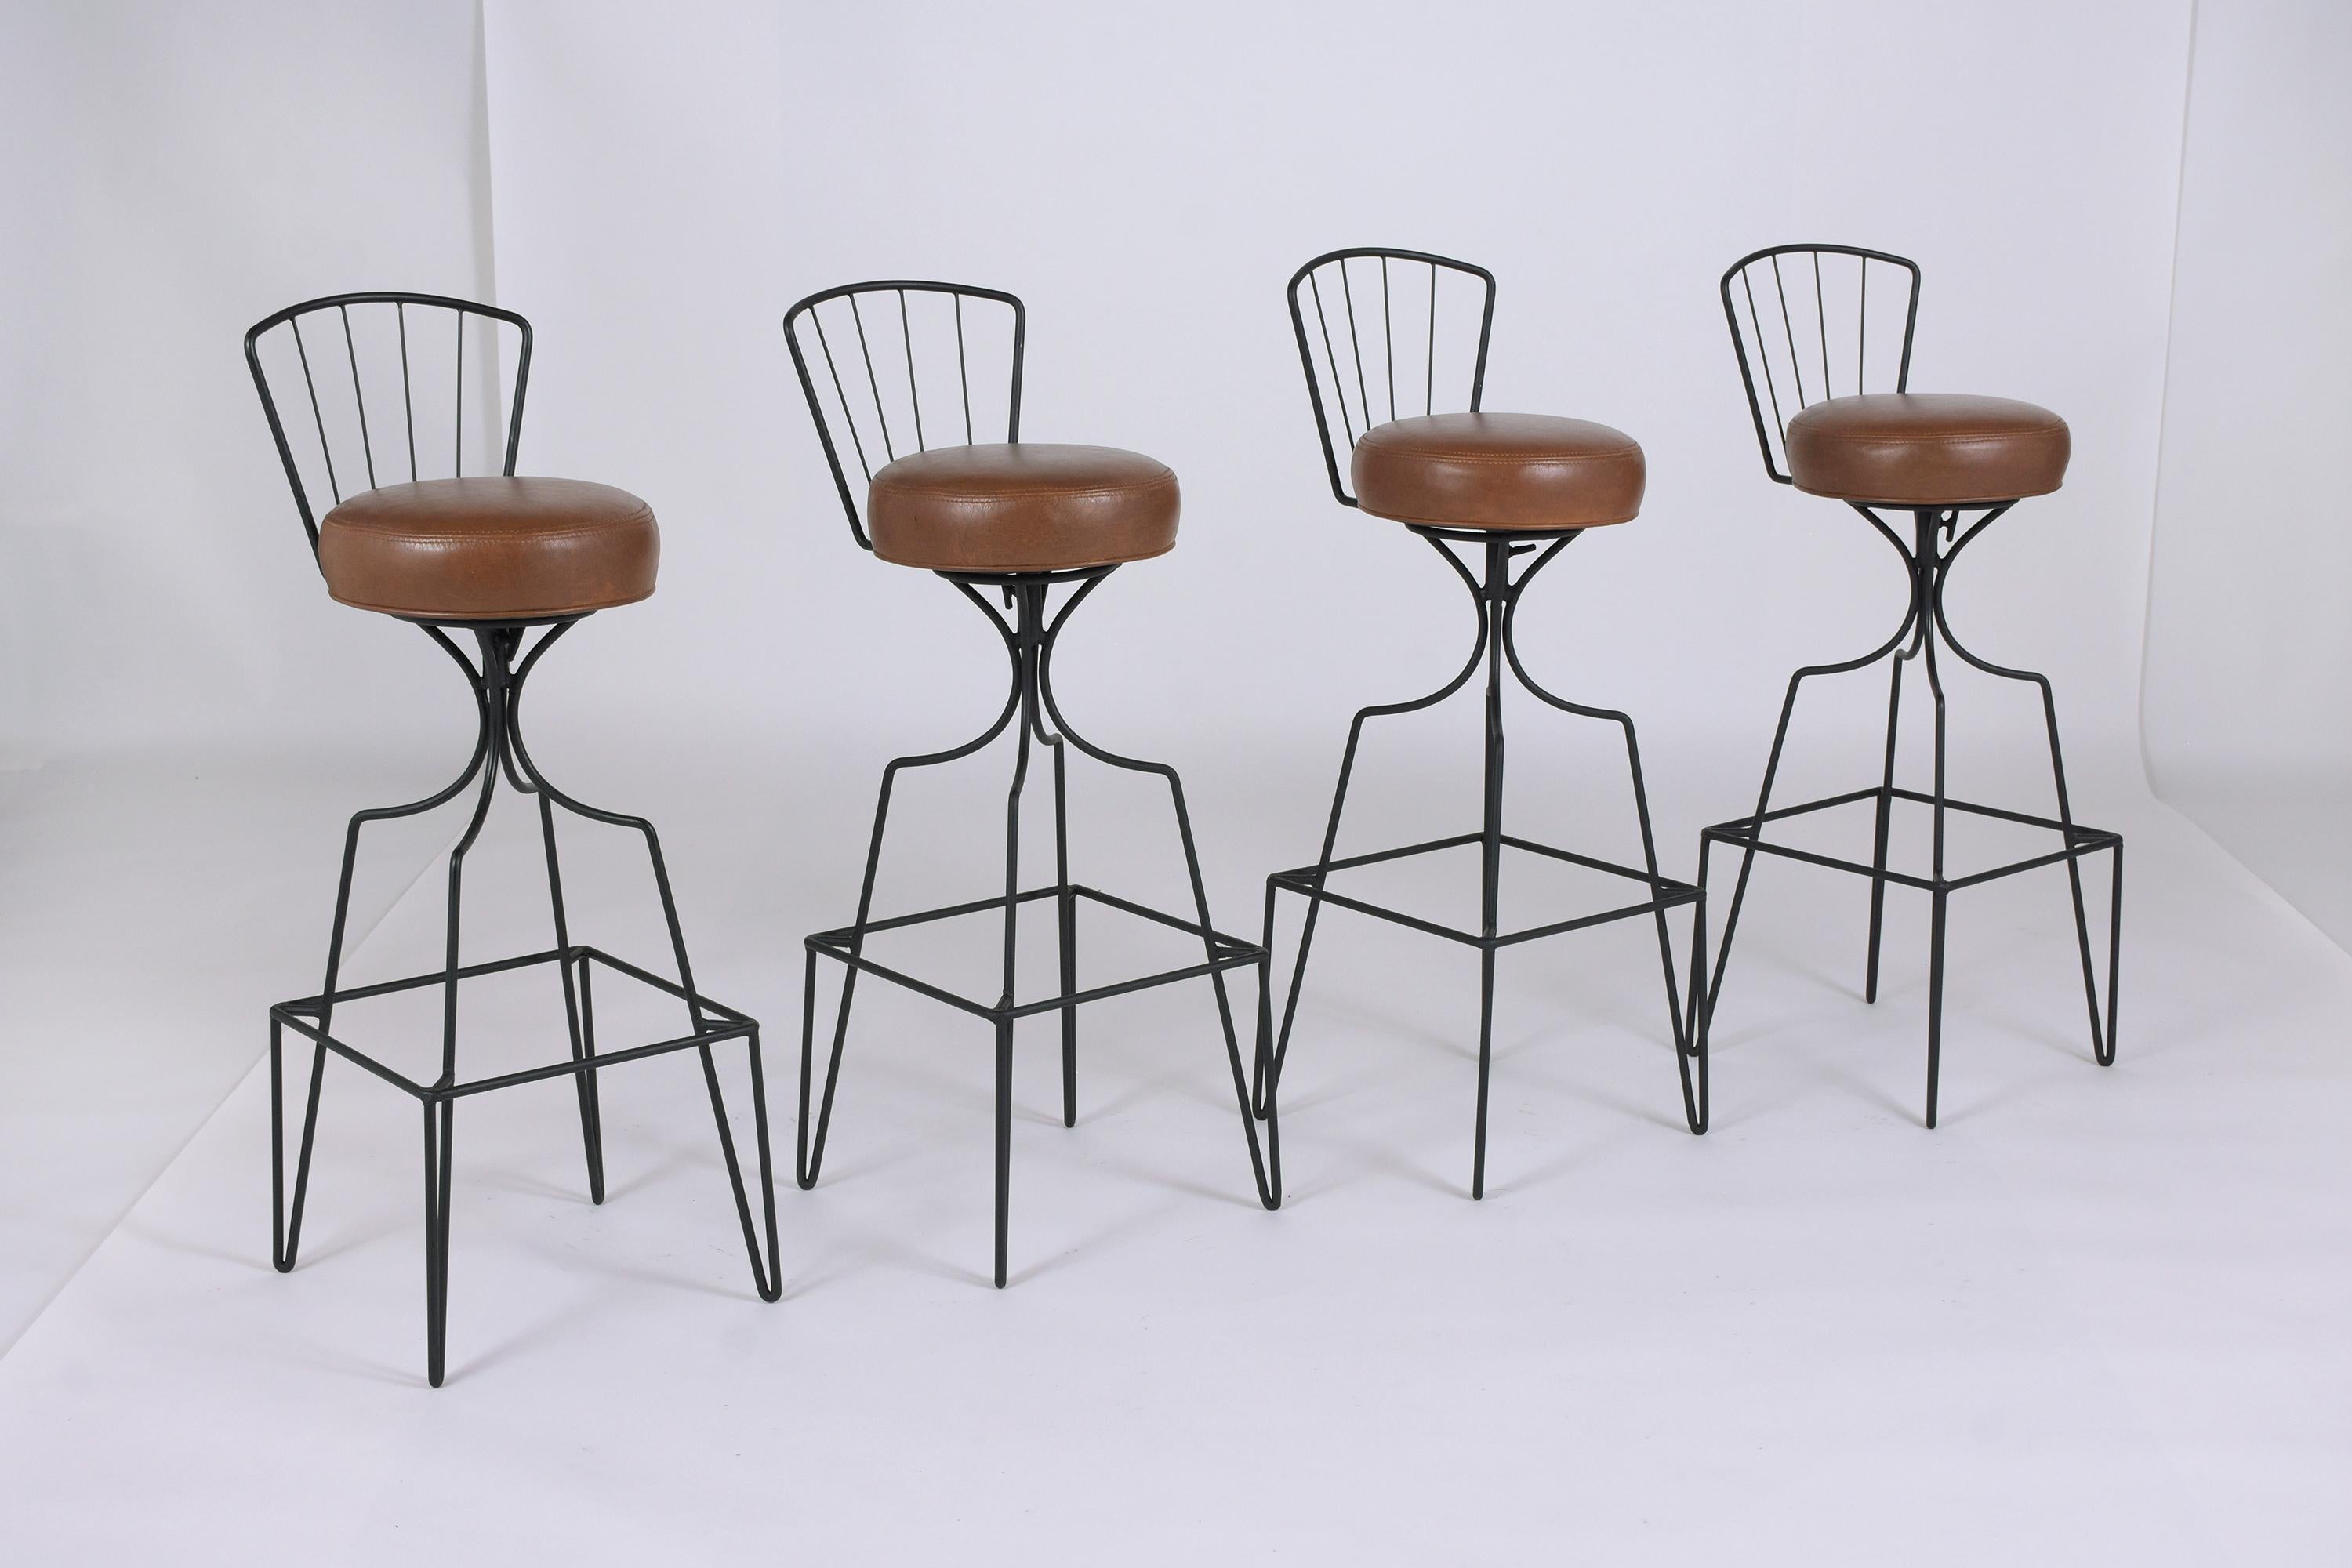 This vintage set of four bar stools is in great condition and has been newly restored by our team of in-house craftsmen. The stools have round seat cushions newly upholstered in brown leather with topstitch & single piping details, the seats rest on